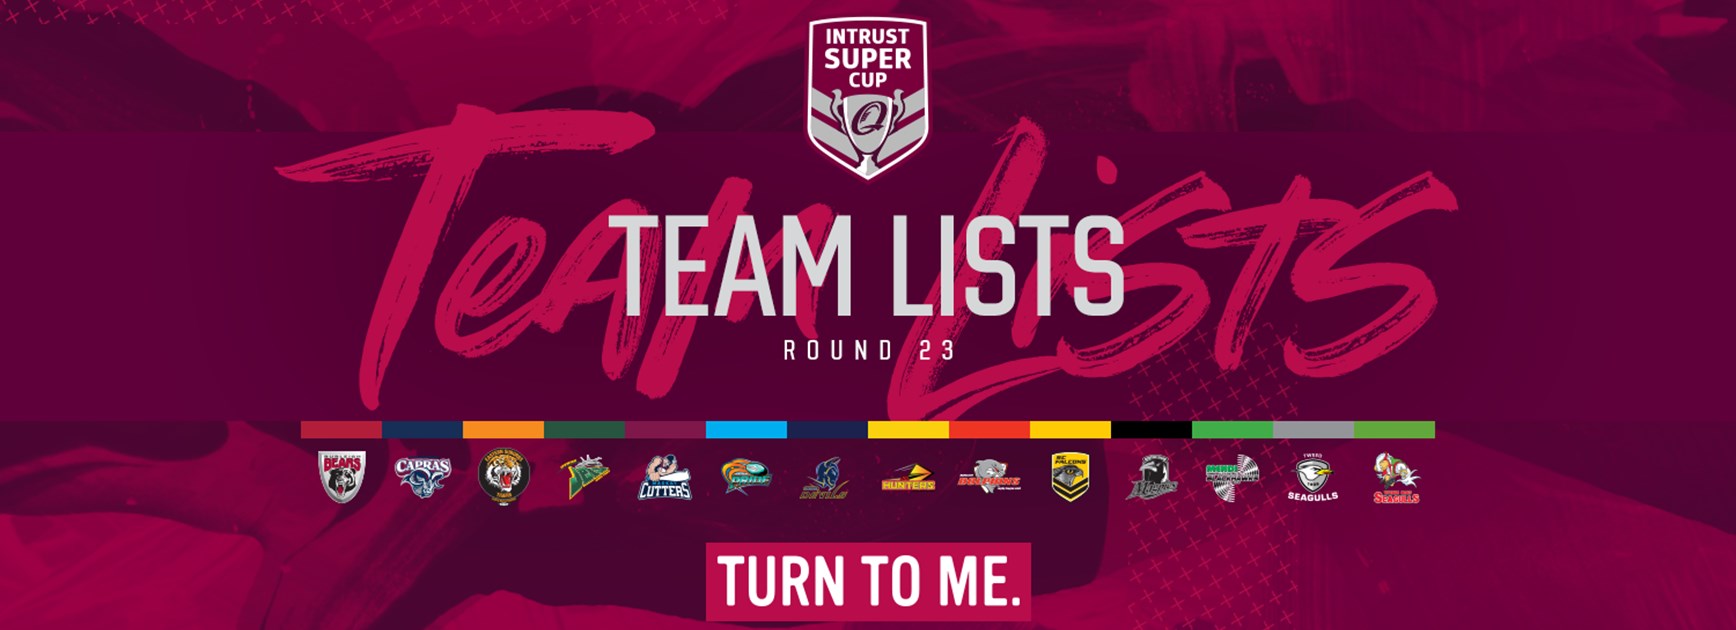 Intrust Super Cup Round 23 Turn to Me teams